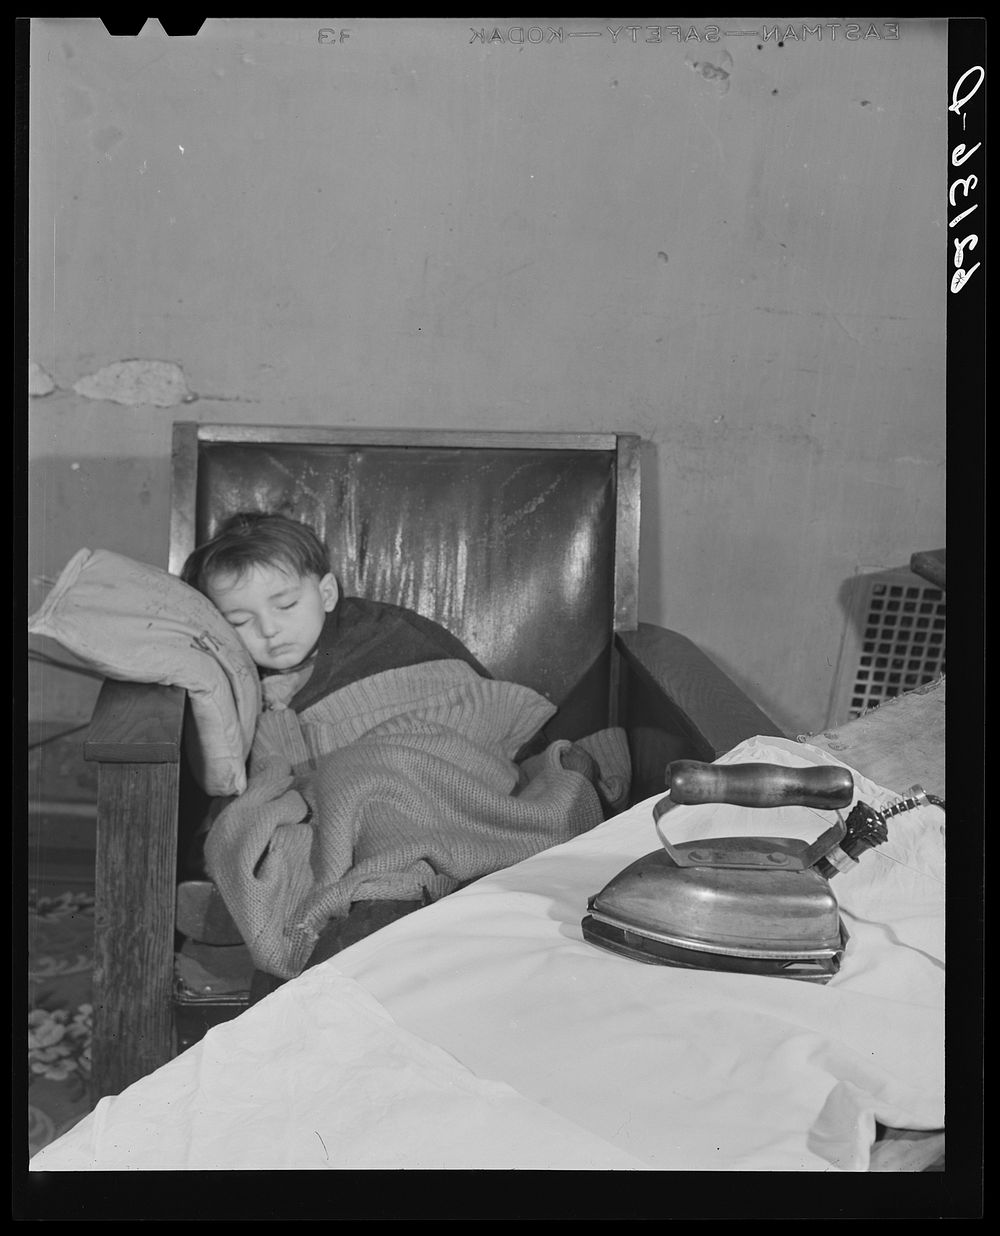 Child of unemployed steelworker sleeping. Ambridge, Pennsylvania. Sourced from the Library of Congress.